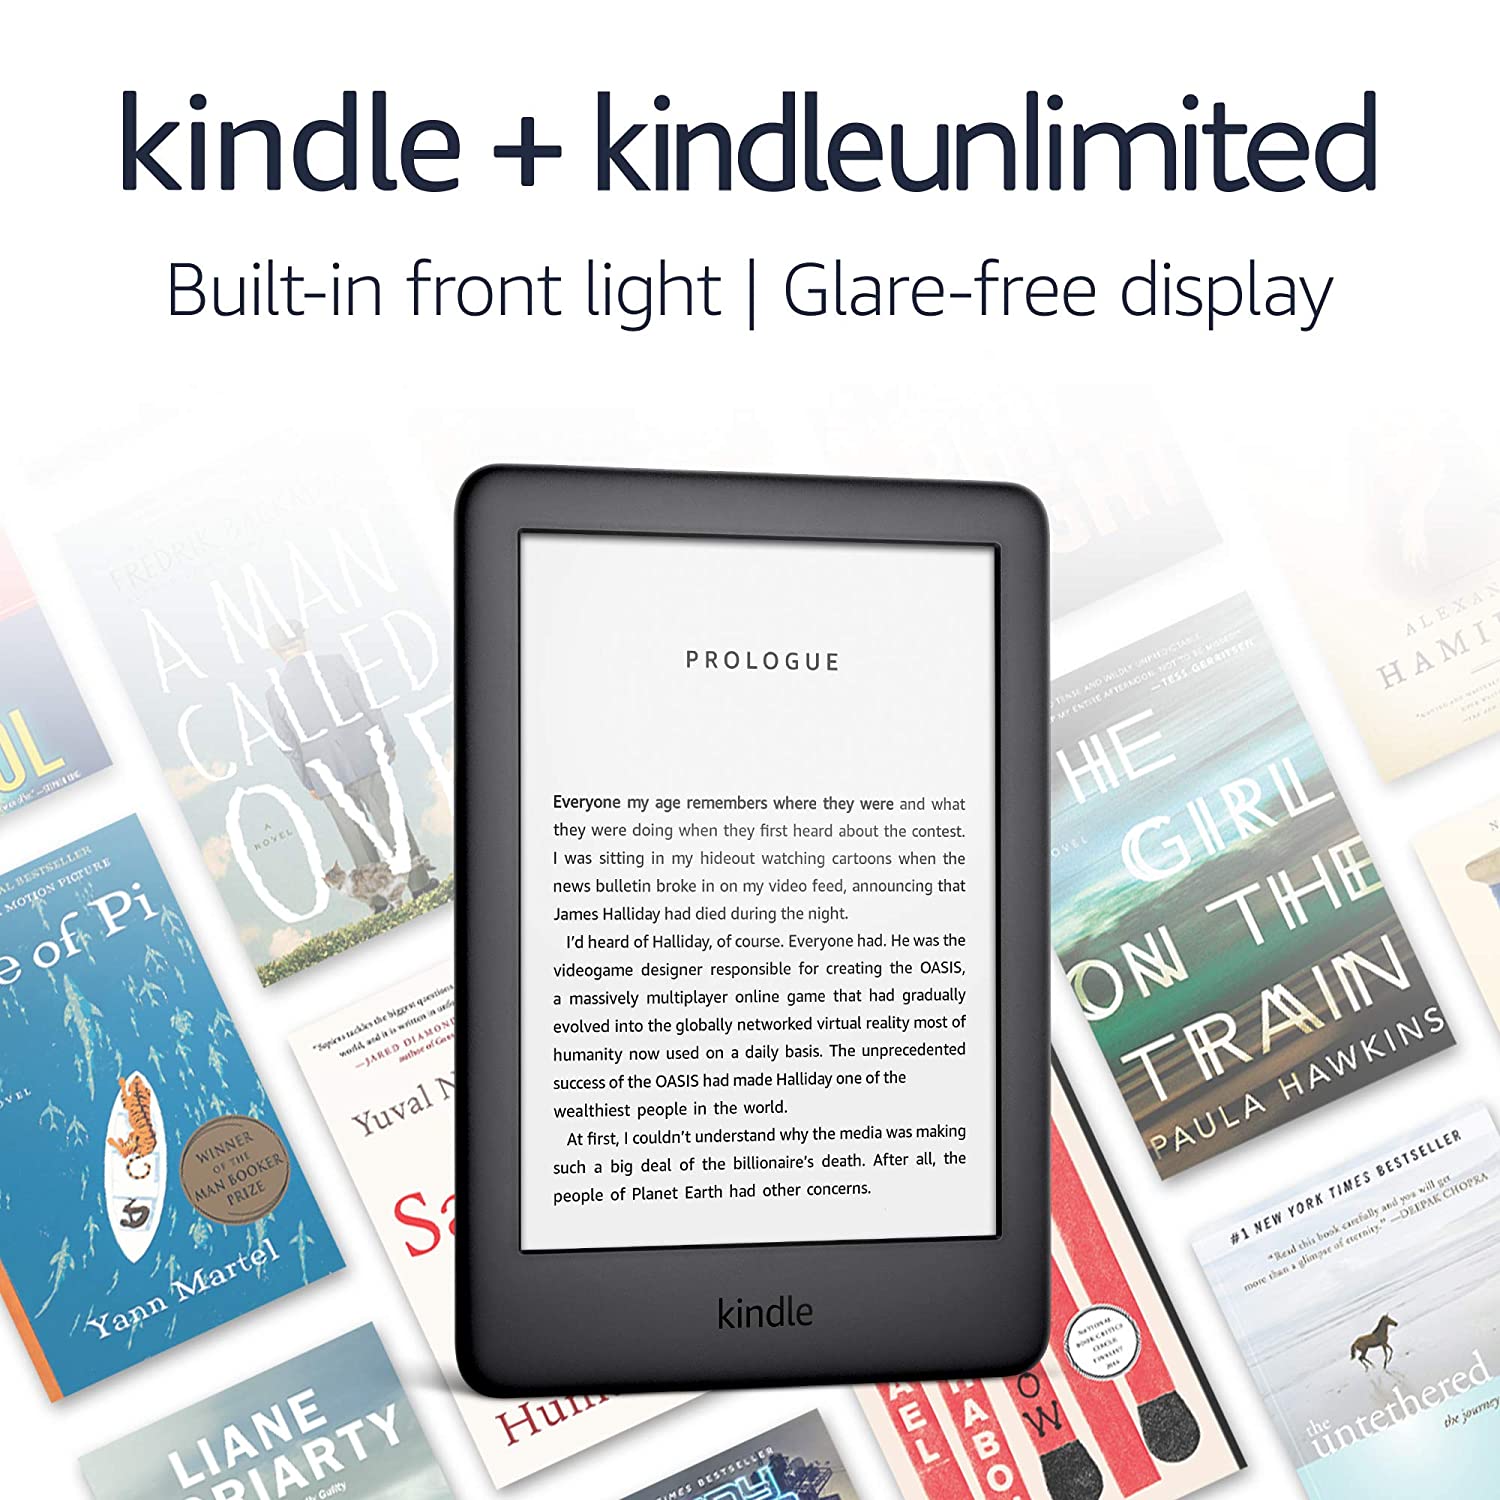 Kindle - 4 GB, Wi-Fi - Includes Special Offers + Kindle Unlimited